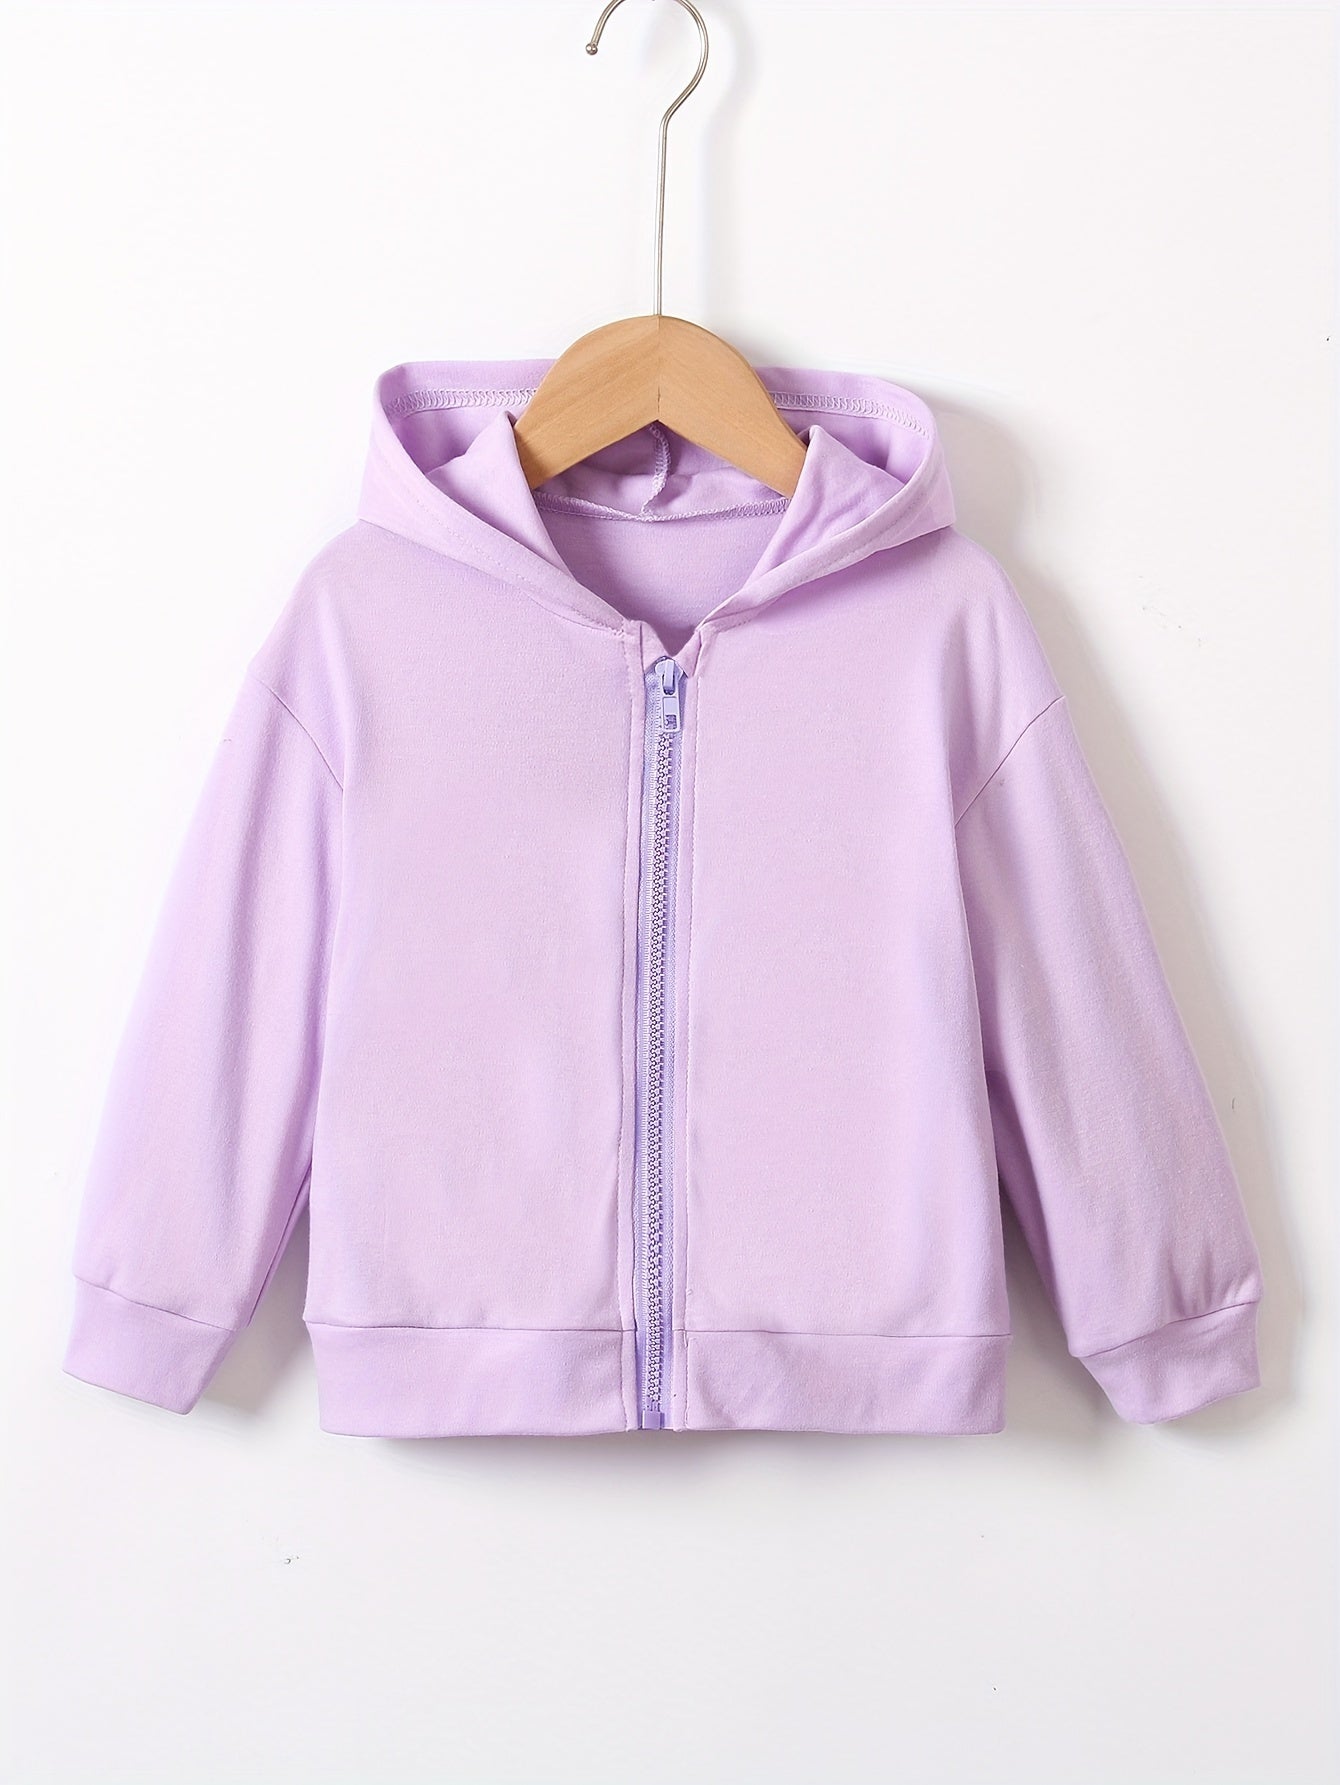 Girls Plain Color Hooded Jacket Zipper Casual Long Sleeve Cardigan For Kids 4-7 Years Old